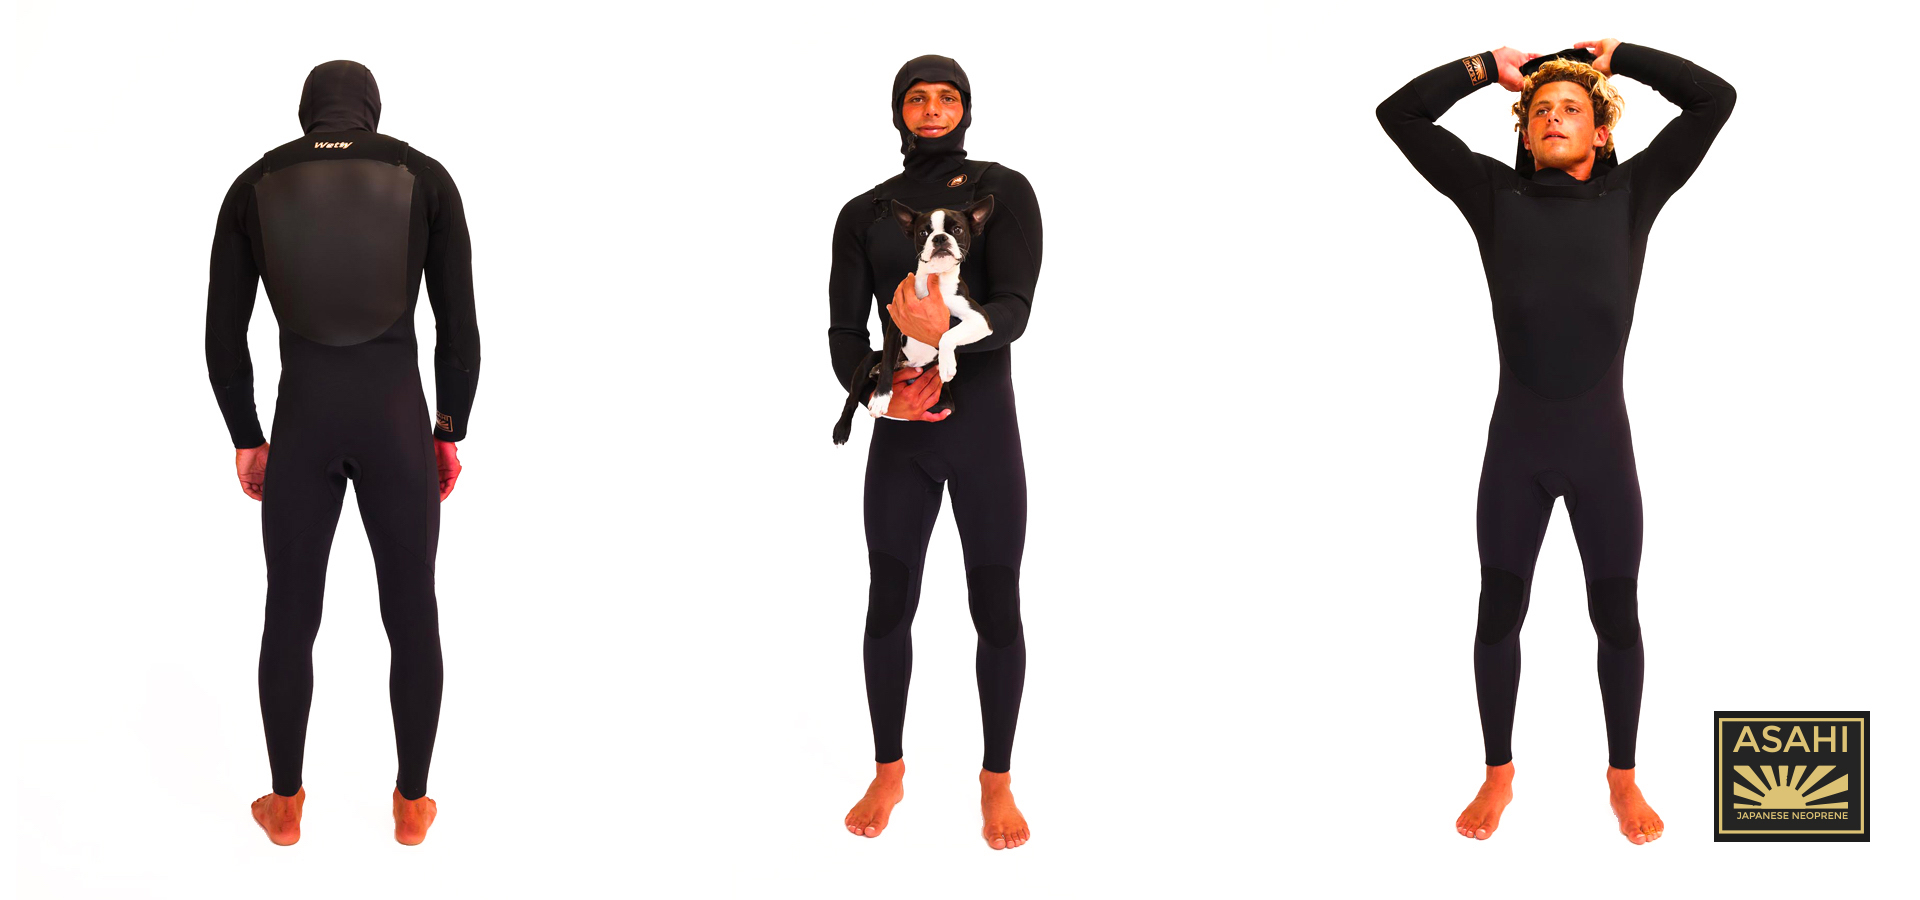 How tight should a wetsuit be and will a wetsuit stretch? - 220